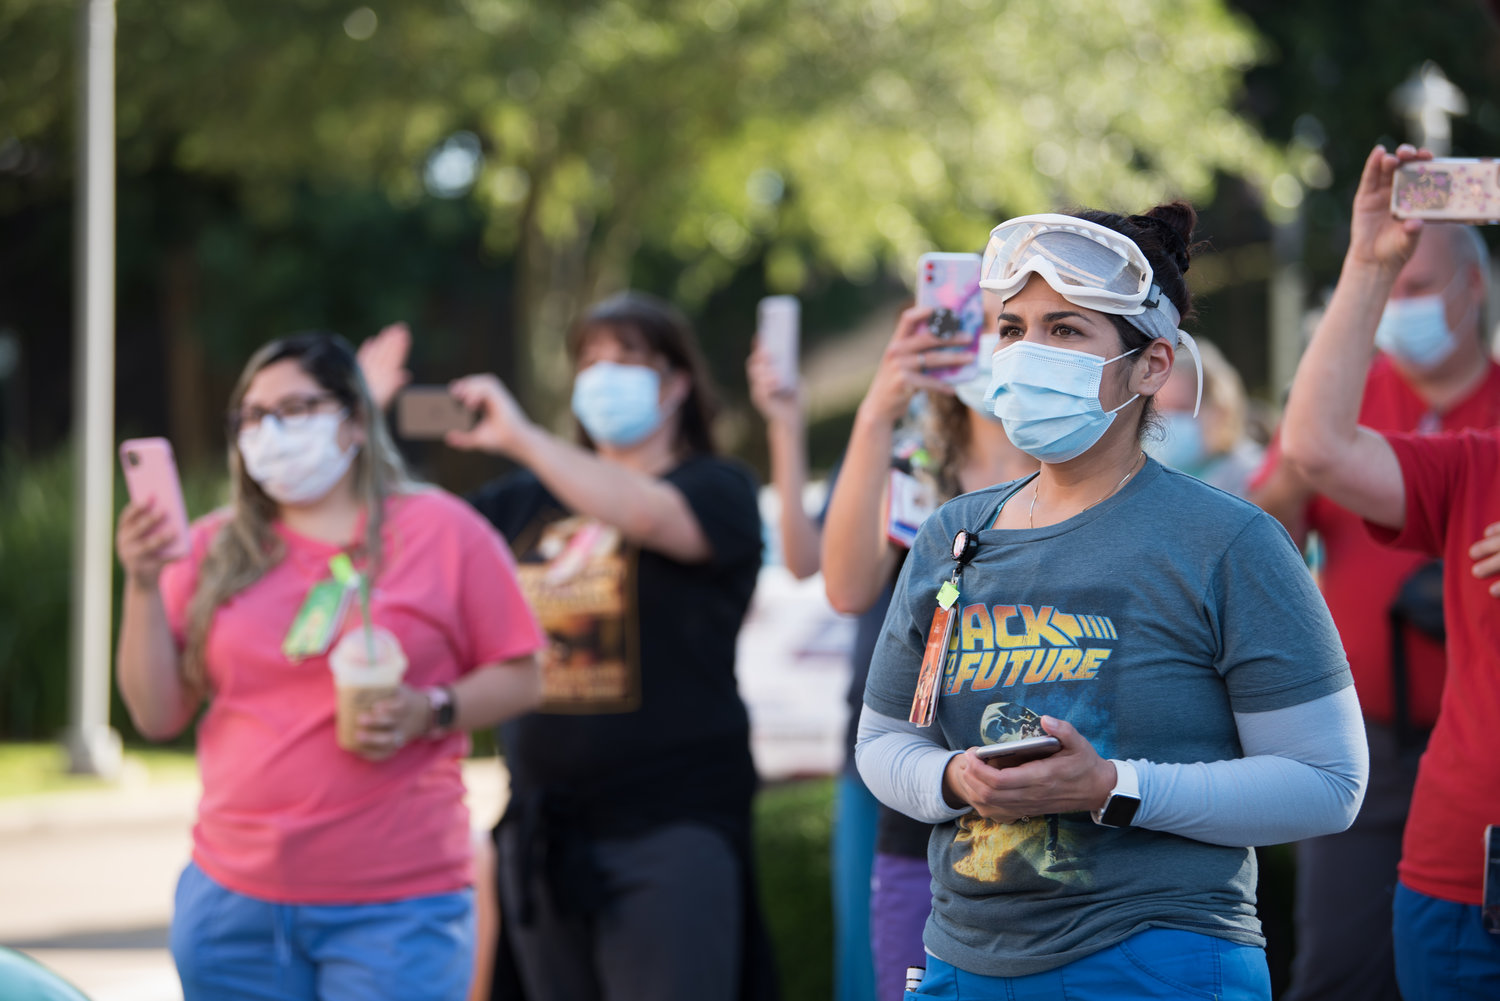 Health care workers stood outside the hospital and waved at first responders going by while wearing masks and keeping safe hygiene practices.